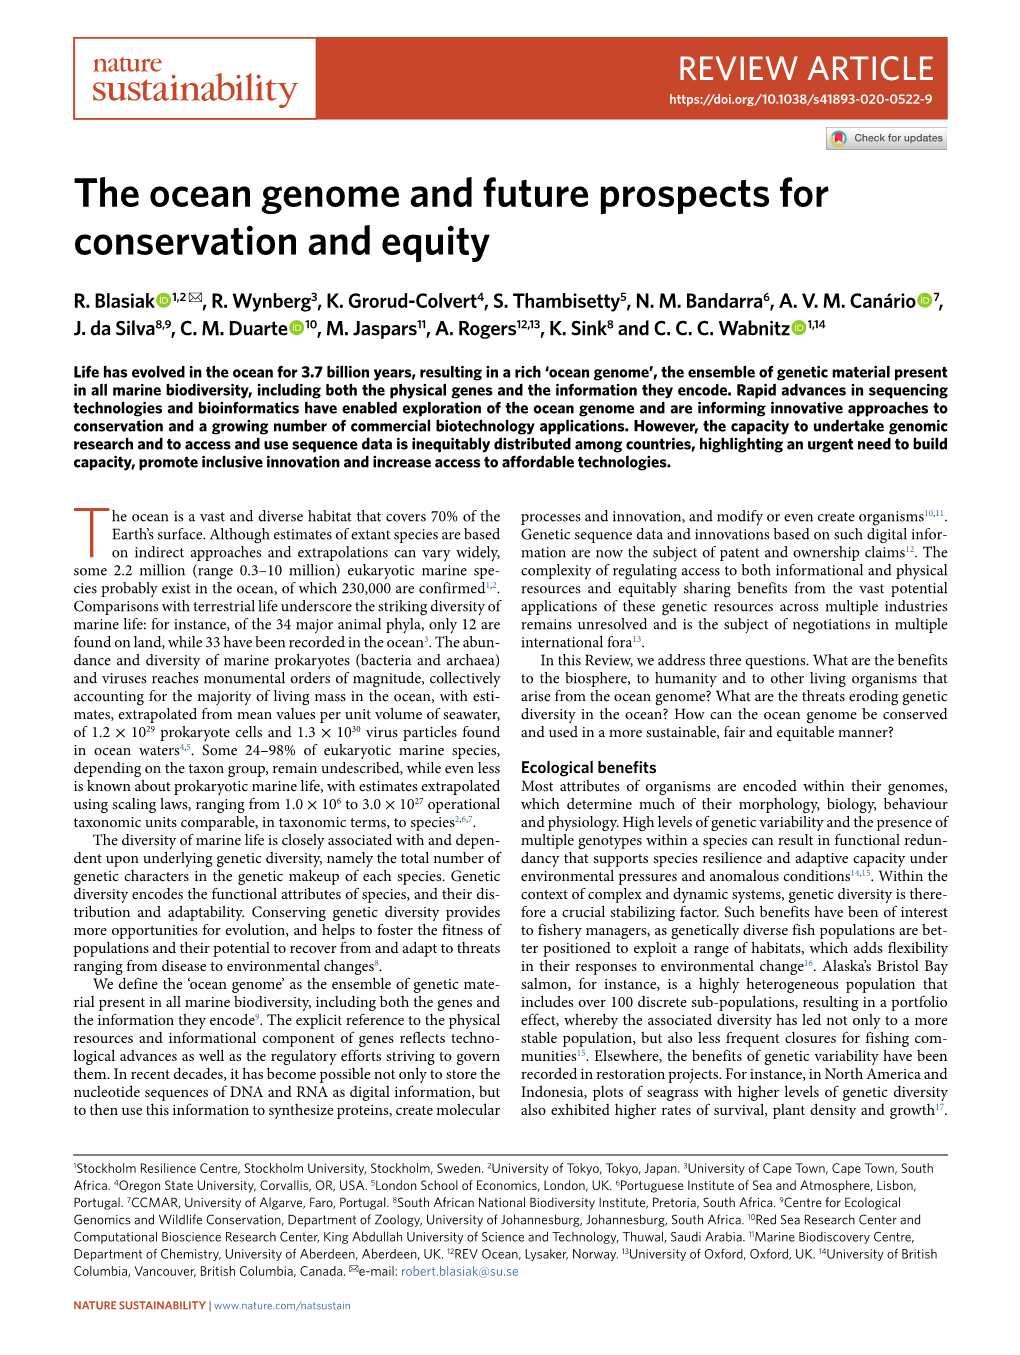 The Ocean Genome and Future Prospects for Conservation and Equity